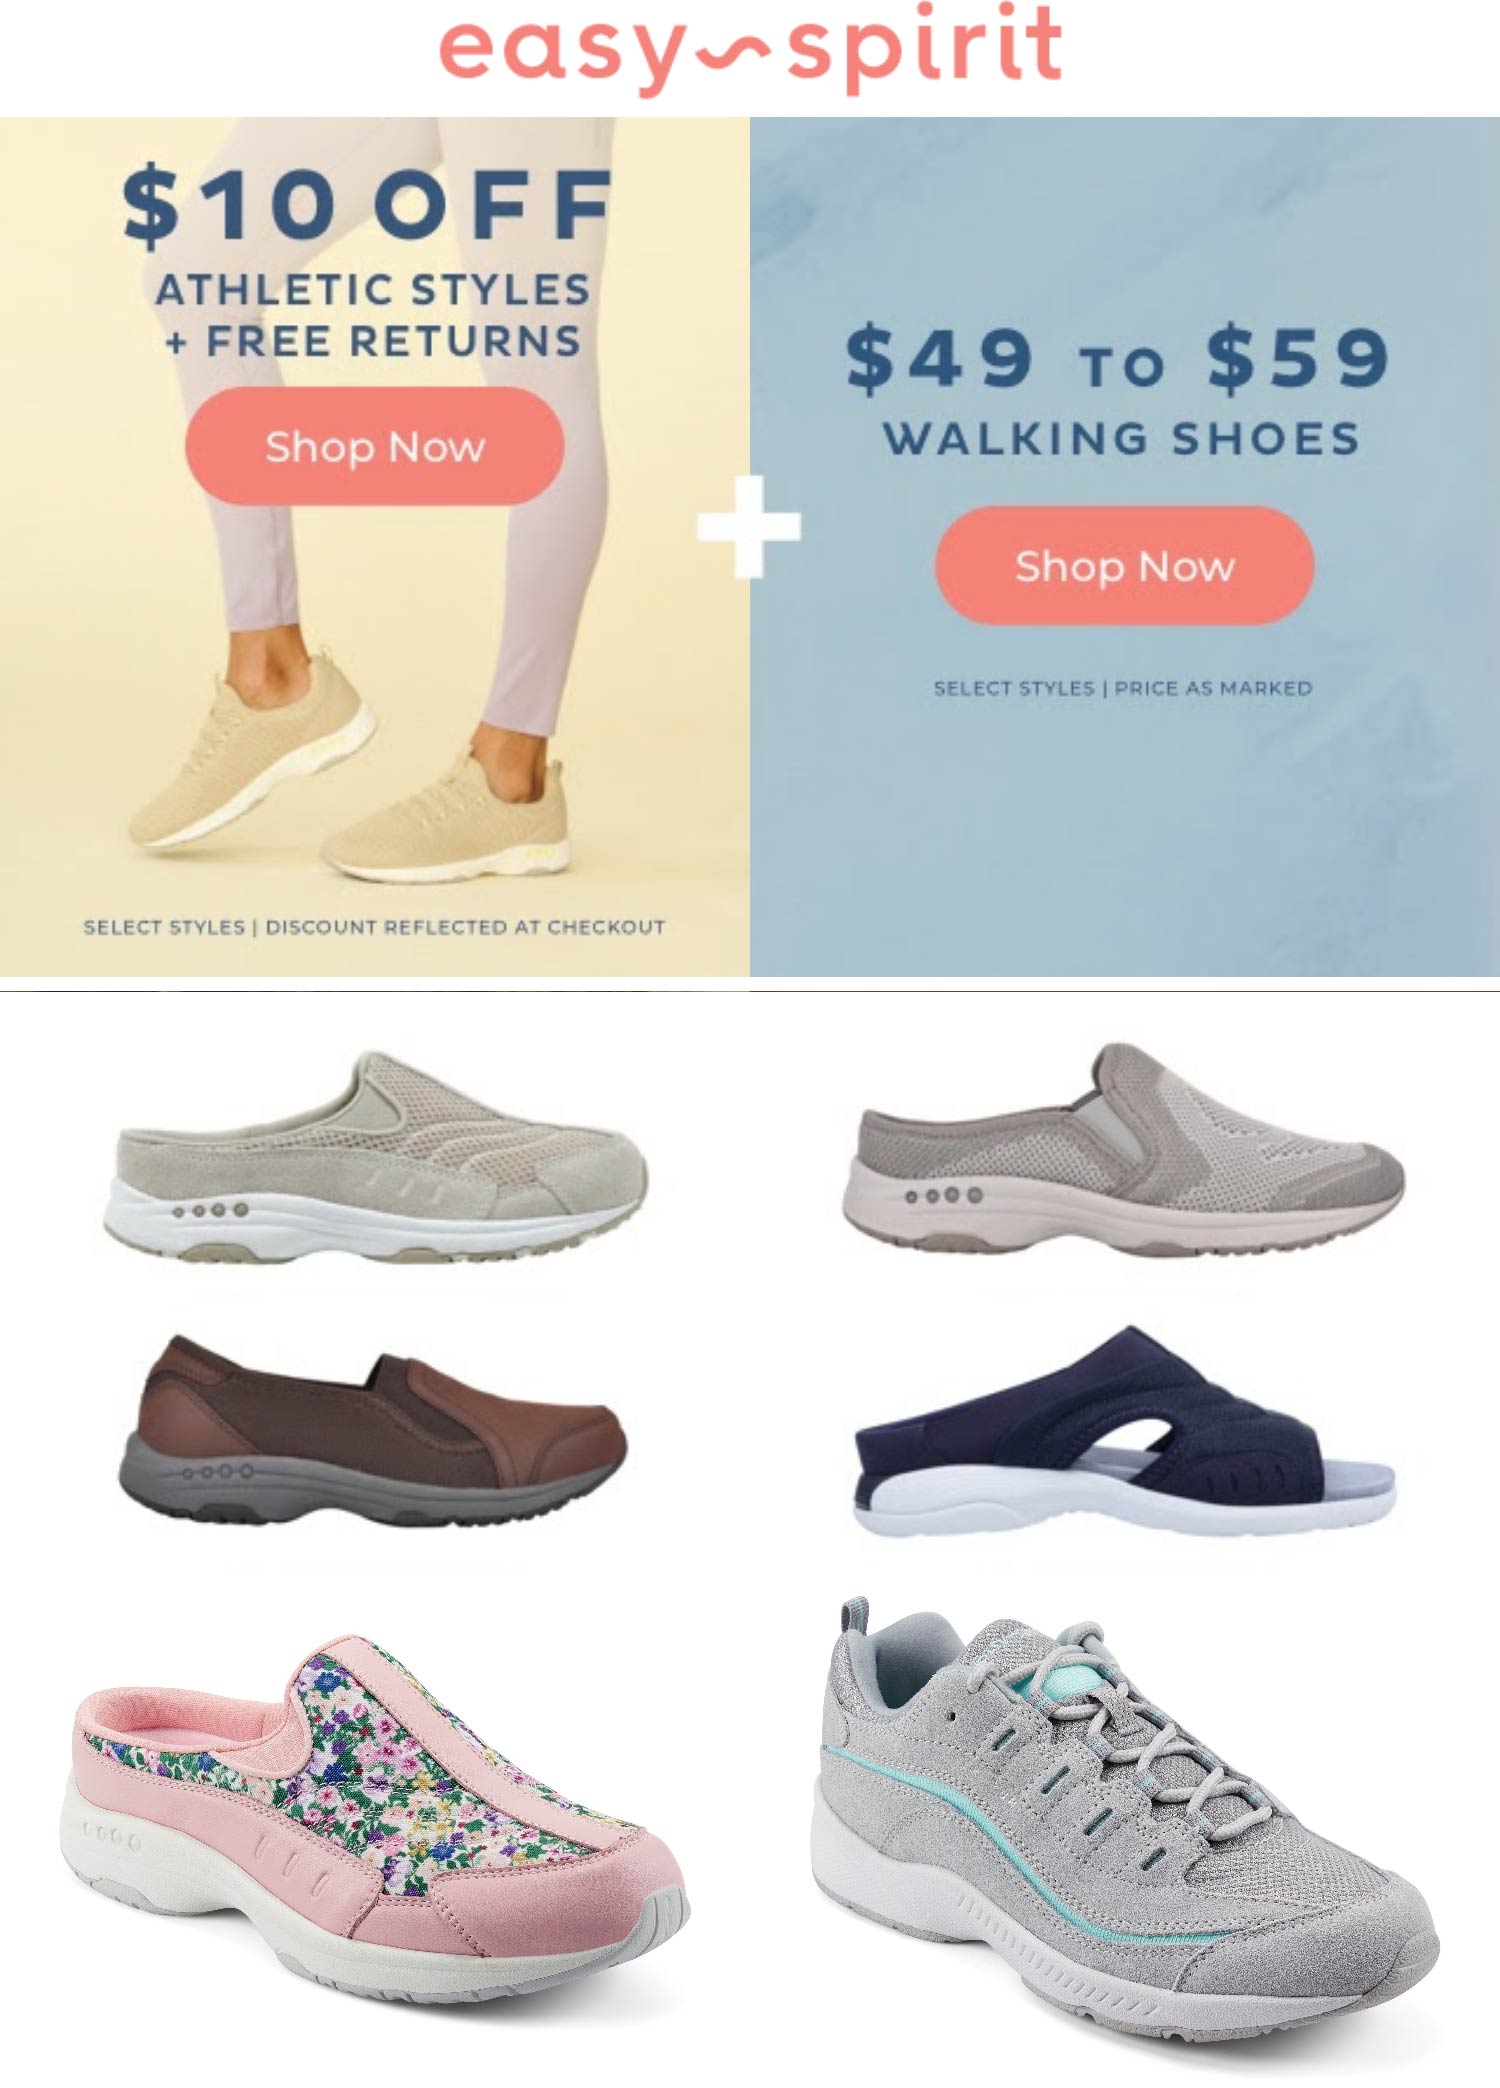 Easy Spirit stores Coupon  $10 off athletic styles today at Easy Spirit shoes #easyspirit 